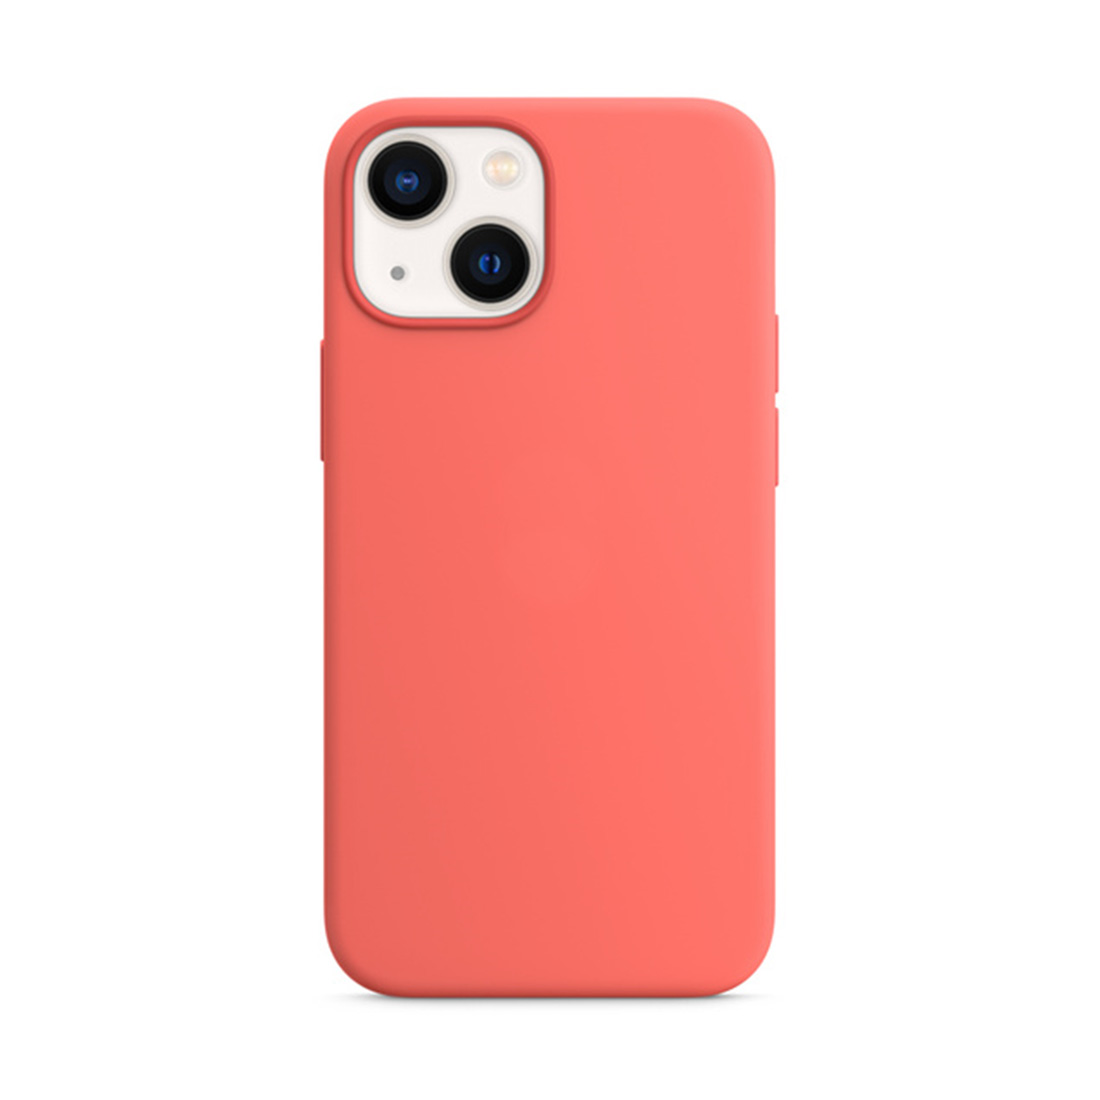 Silicone Case For iPhone 11 - Marigold - MK Mobile